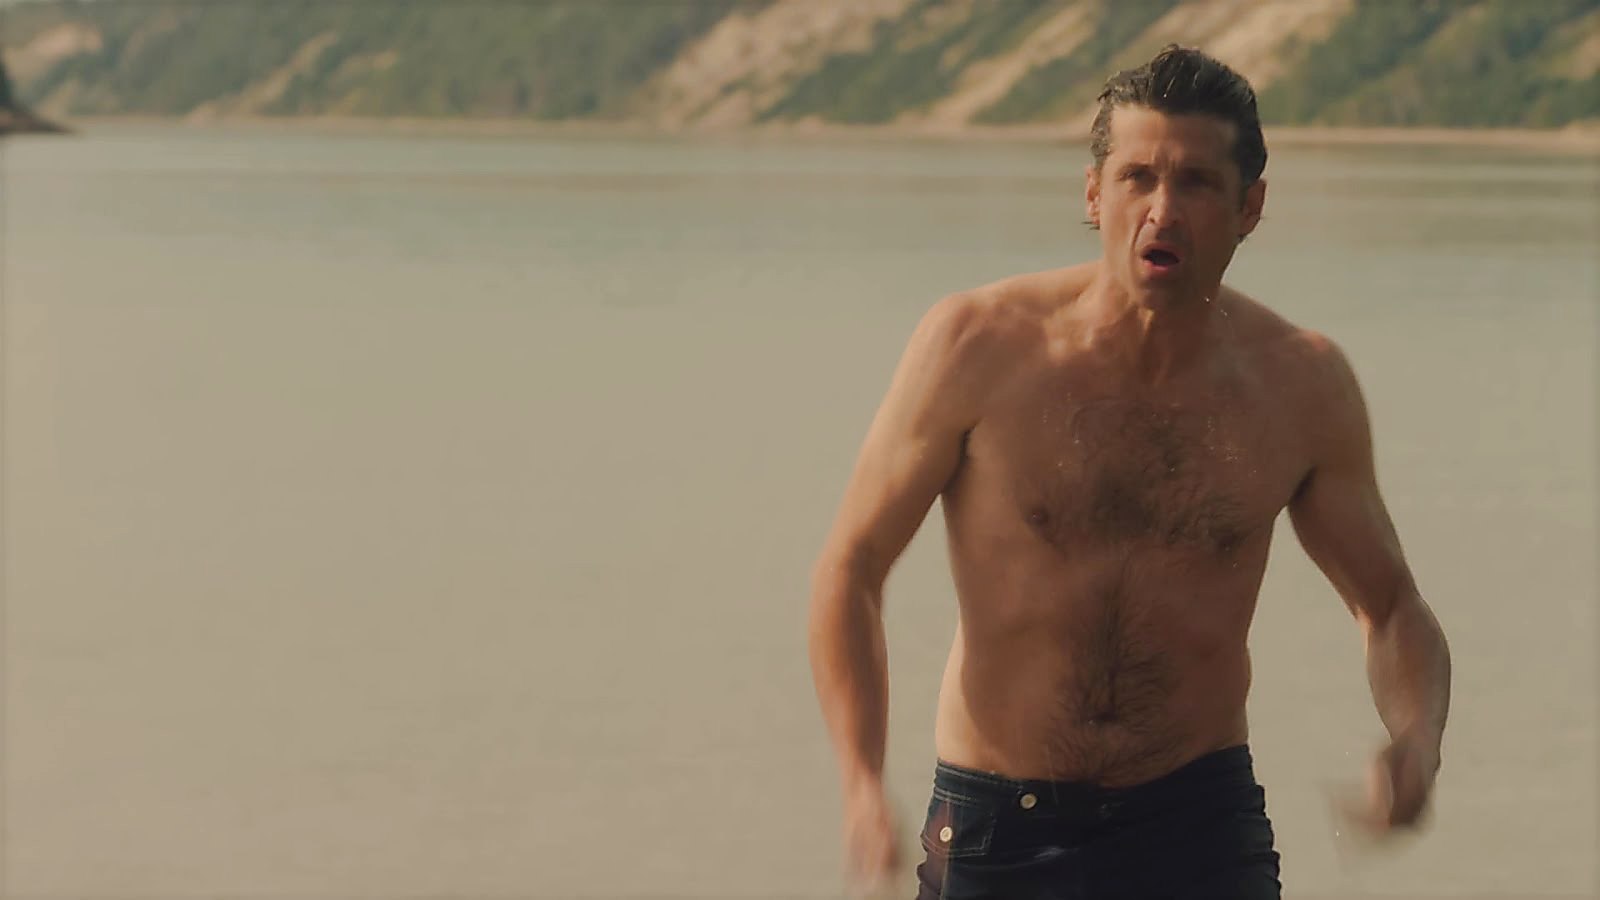 Patrick Dempsey sexy shirtless scene October 14, 2018, 12pm